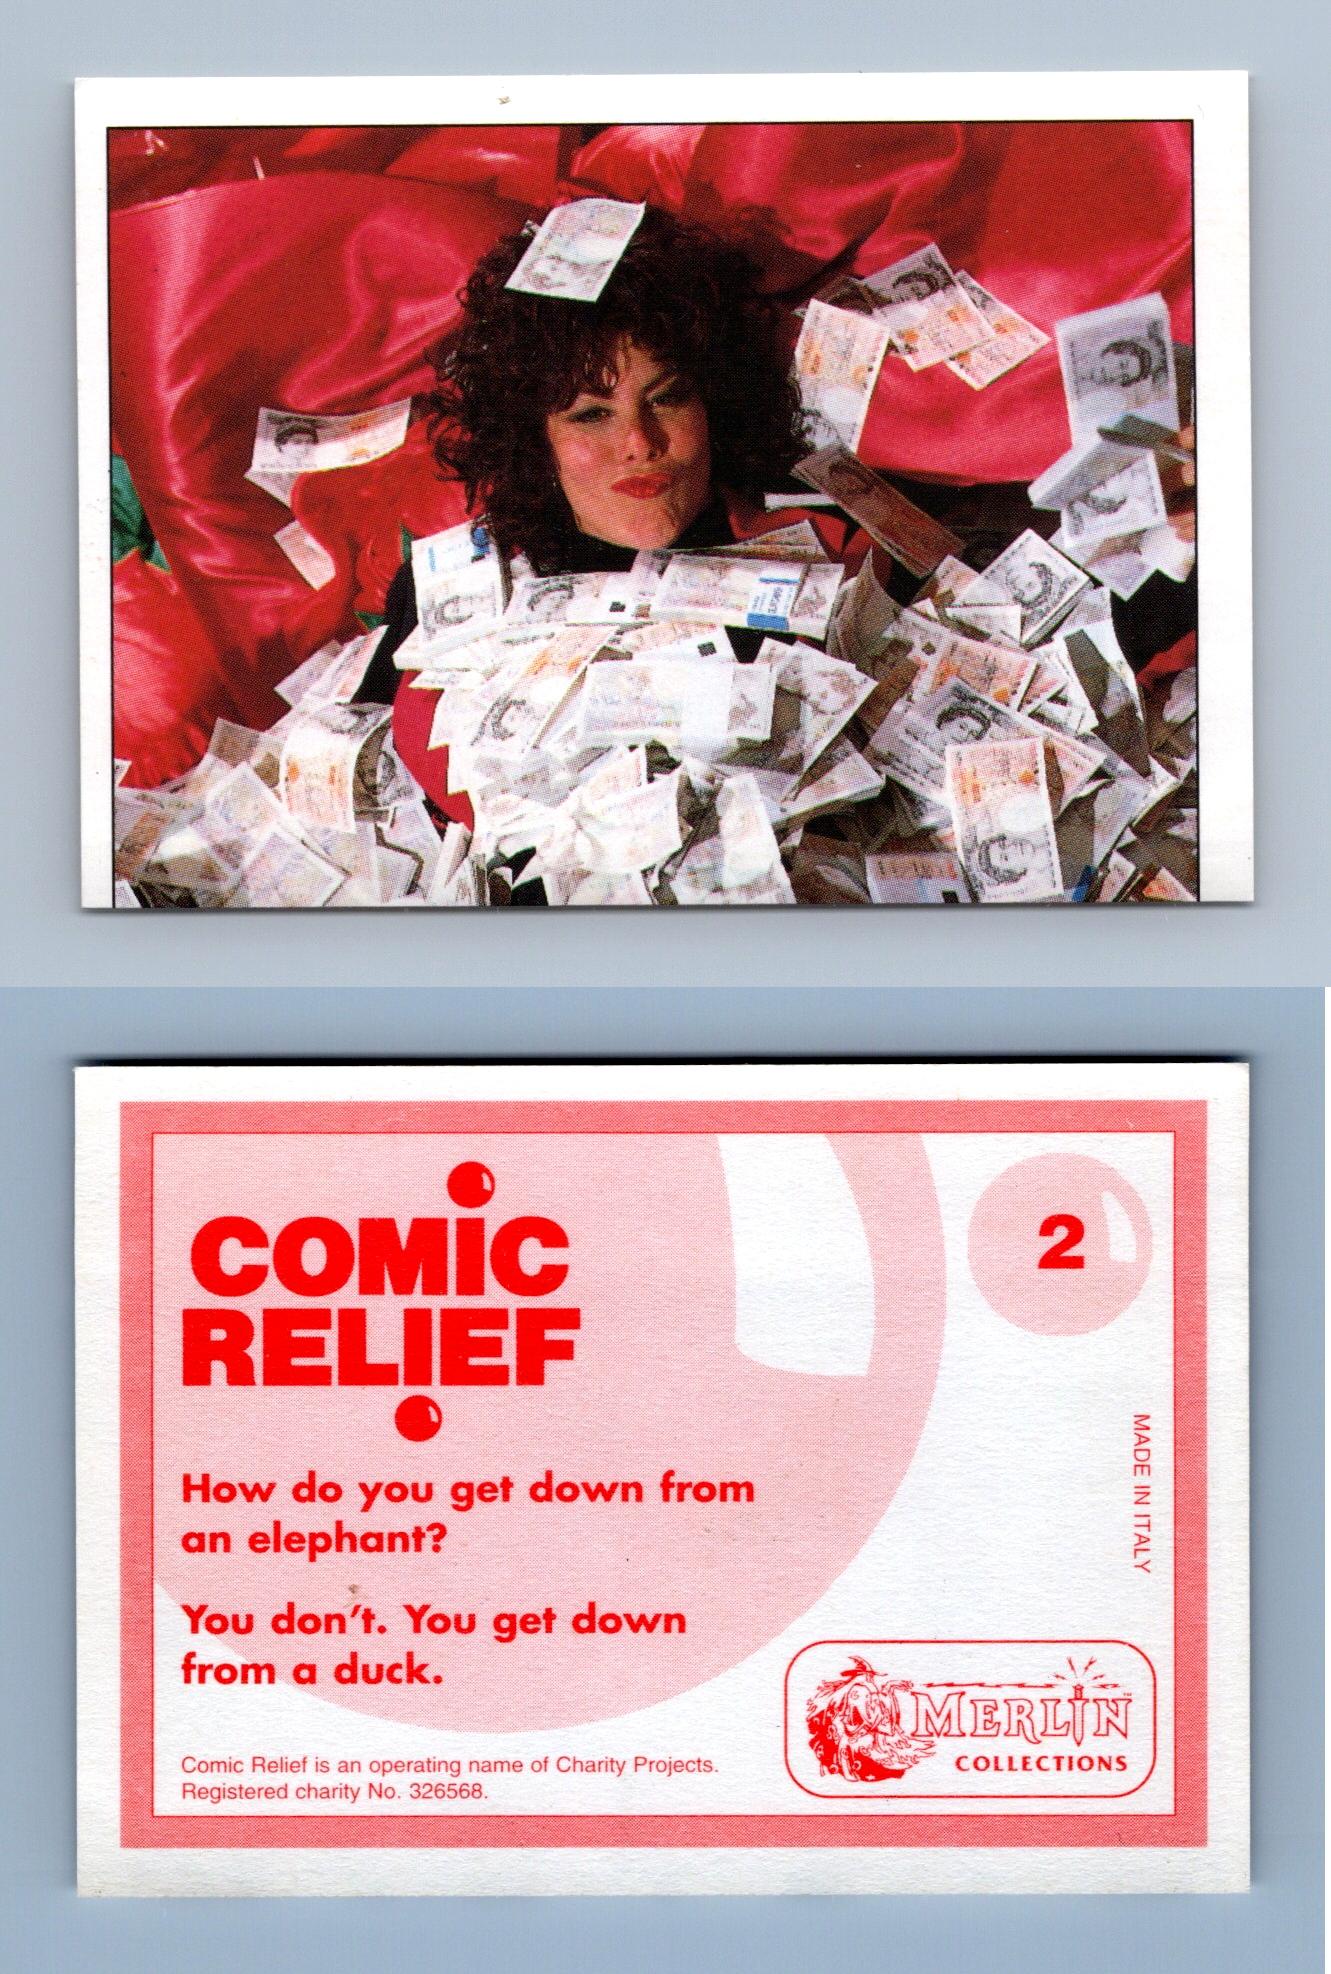 Comic Relief #2 Merlin 1995 Ruby Wax Covered In Money Part 1 of 2 Sticker C845 